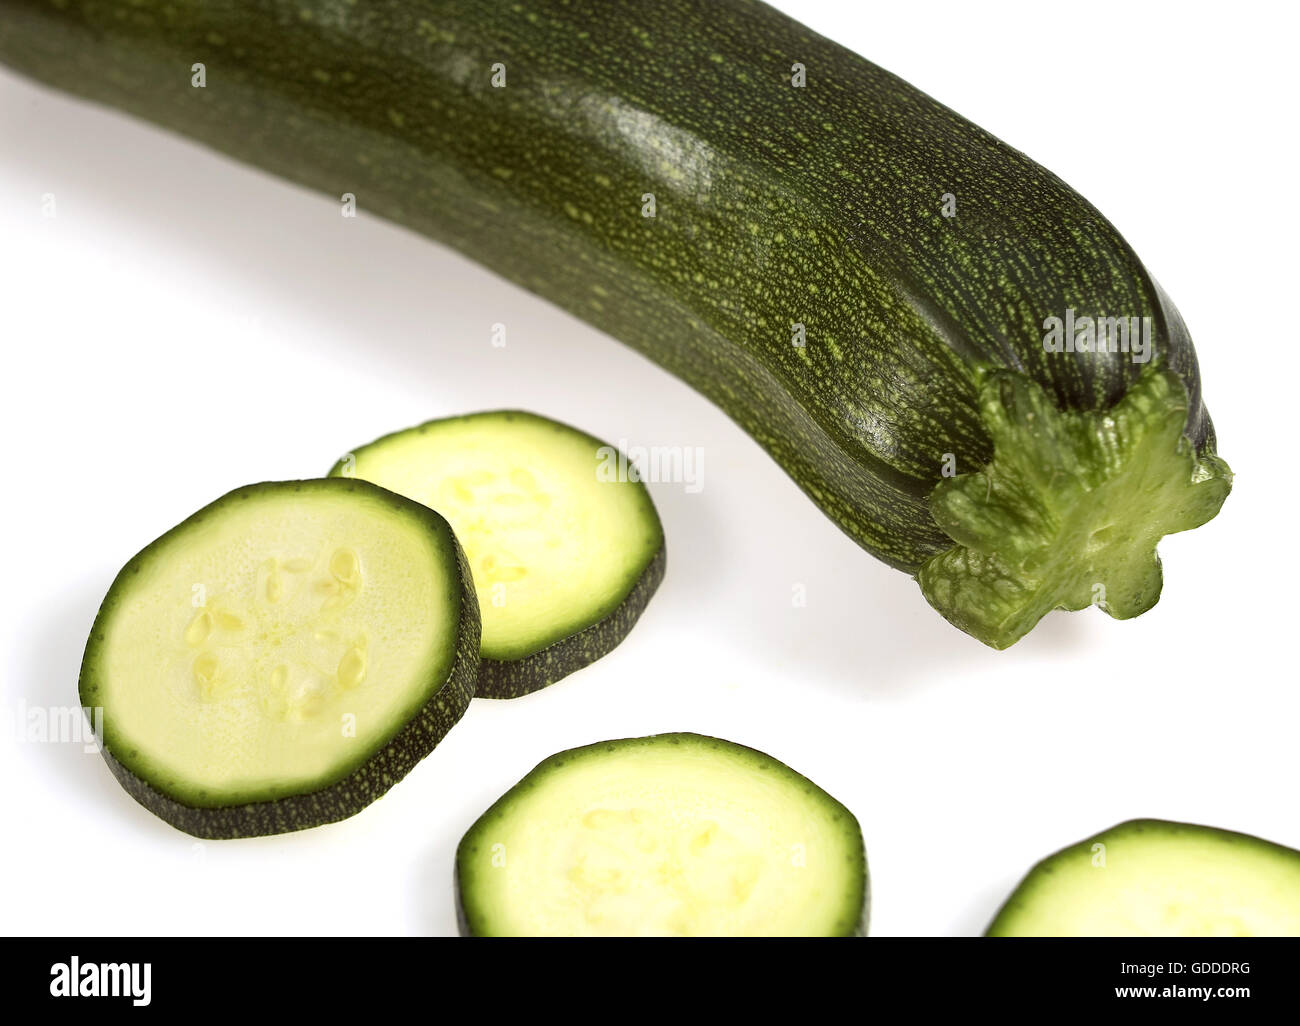 LONG COURGETTE OR ZUCCHINI AGAINST WHITE BACKGROUND Stock Photo